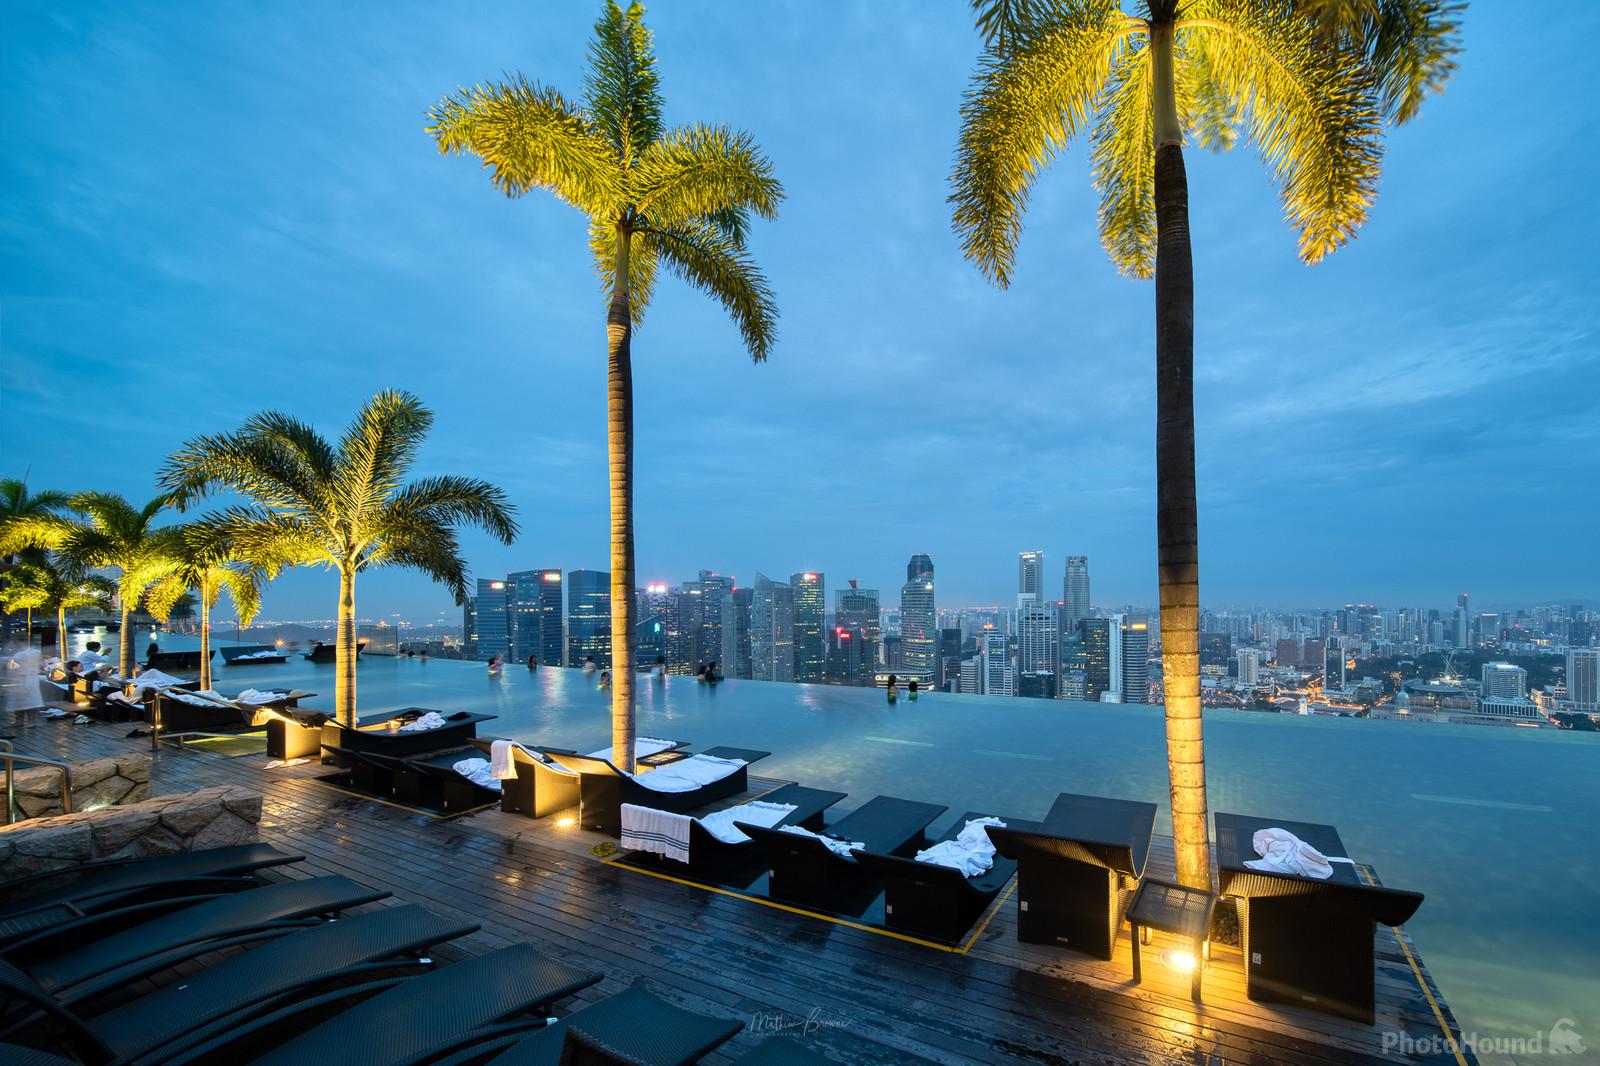 Image of Marina Bay Sands - Hotel & Rooftop Infinity Pool by Mathew Browne